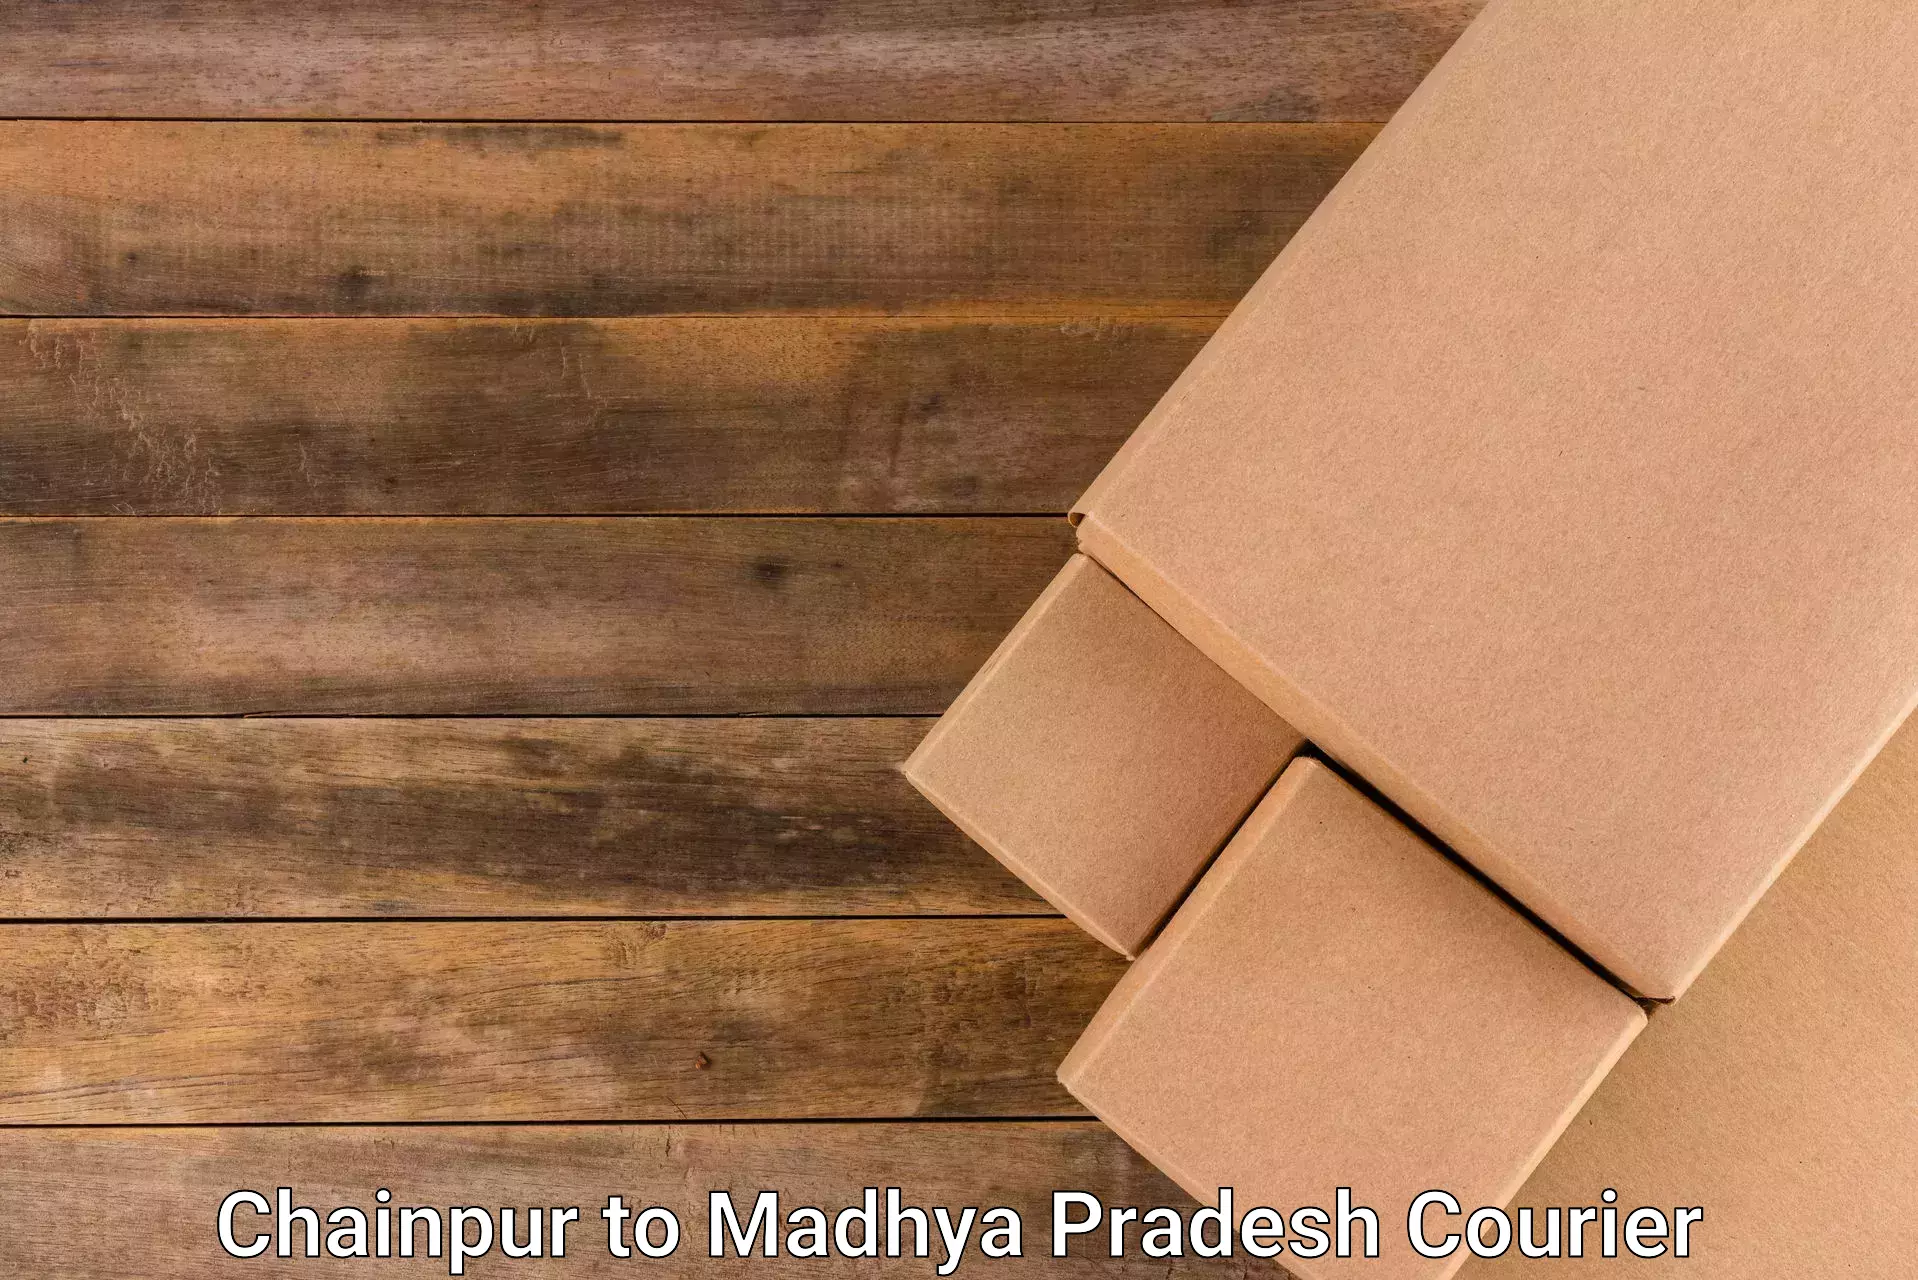 Full-service courier options Chainpur to IIT Indore